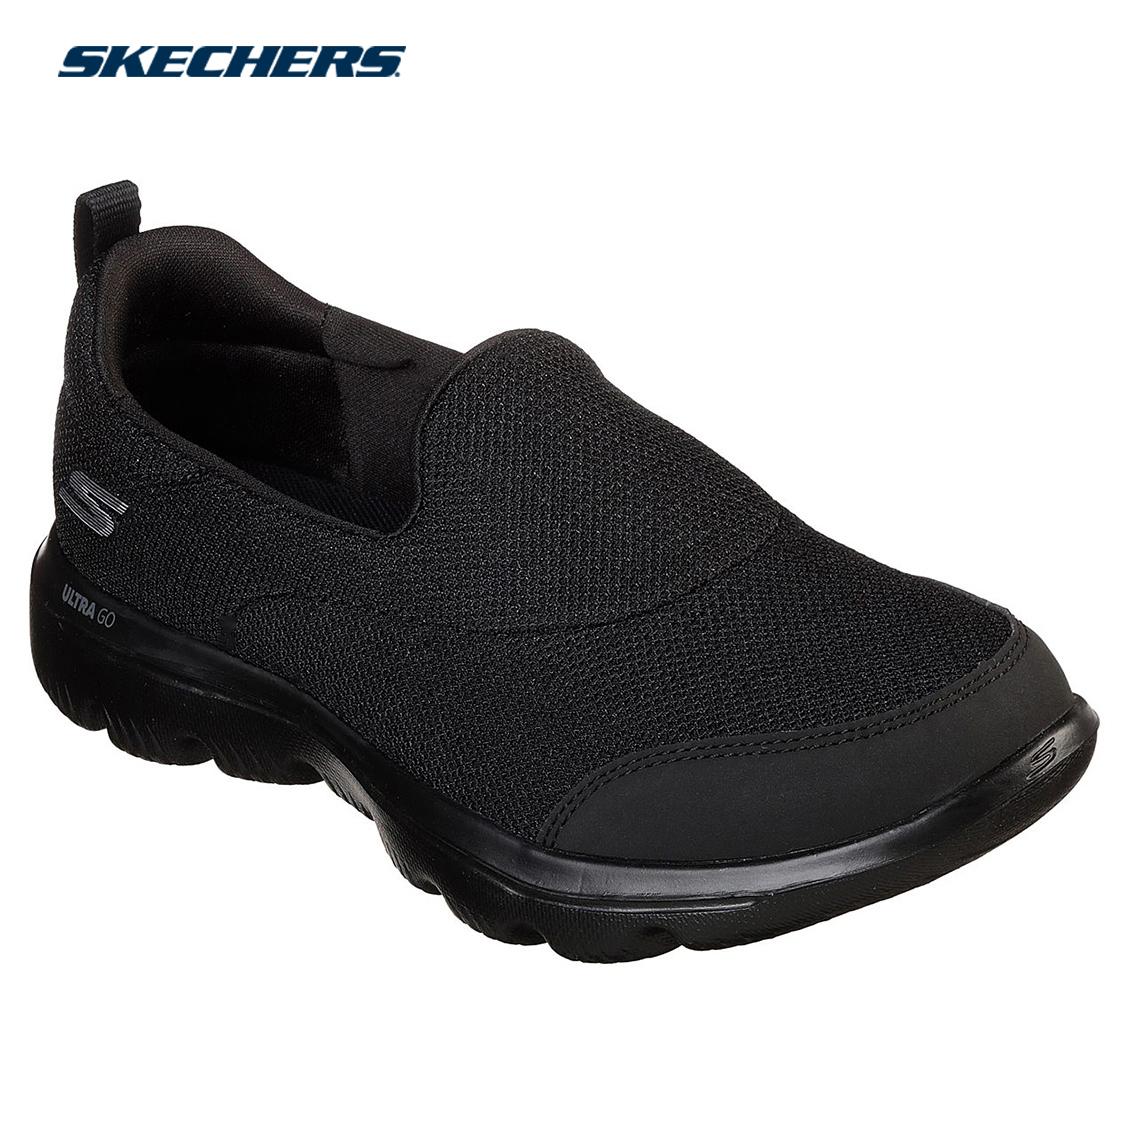 skechers memory foam shoes price philippines